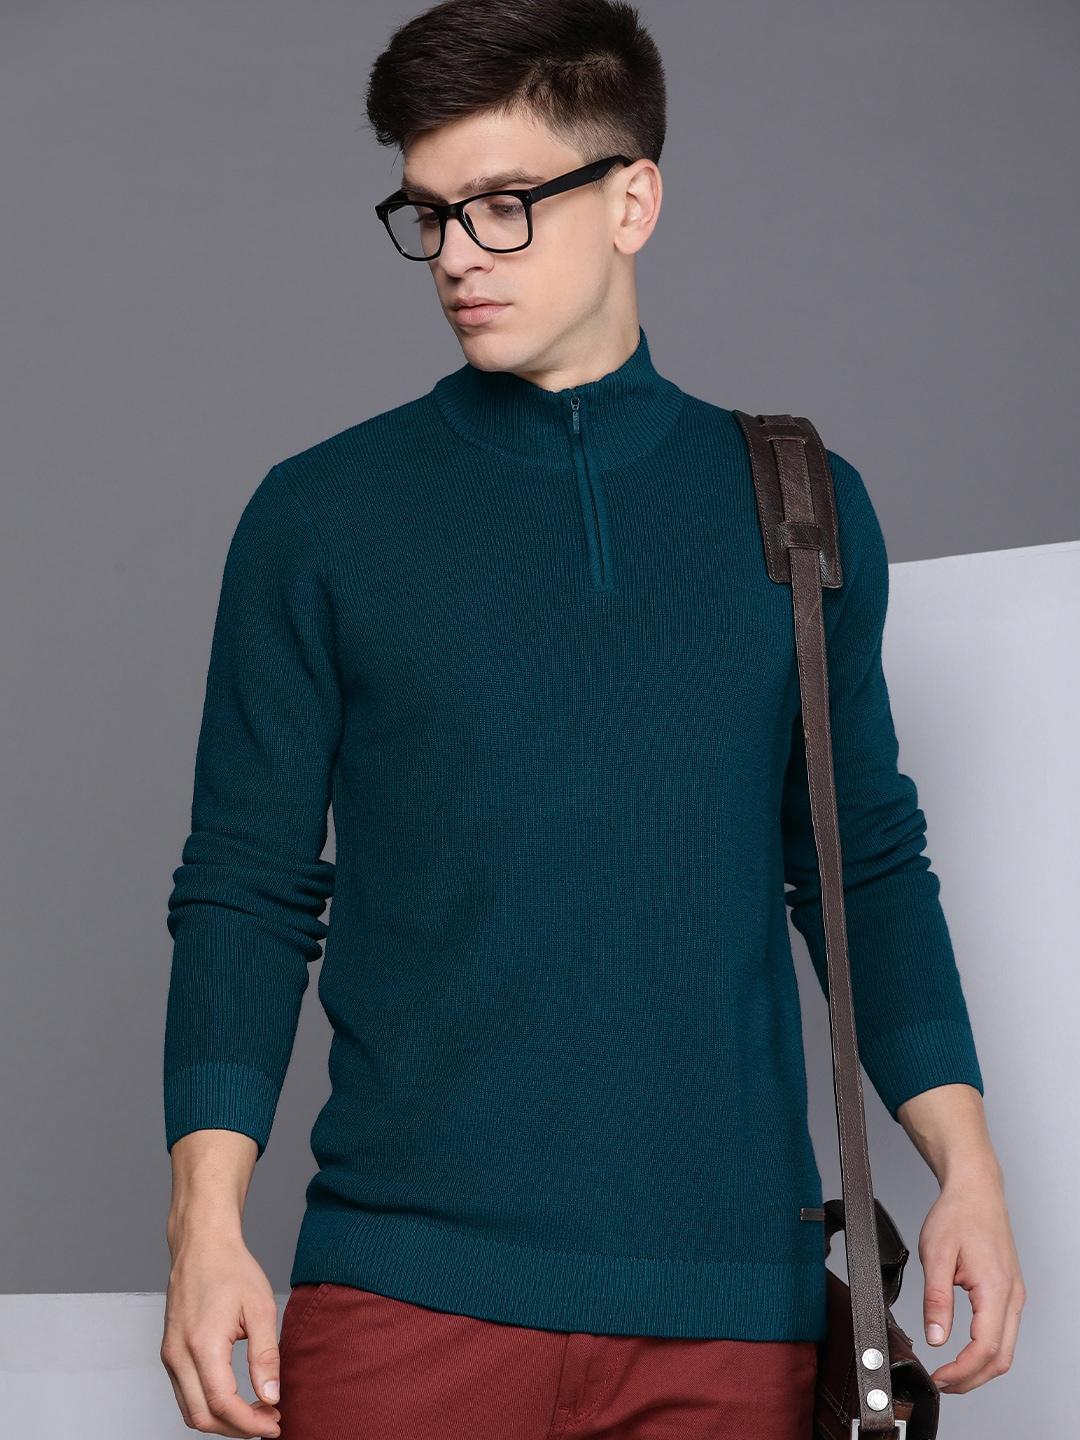 kenneth-cole-men-teal-blue-solid-knitted-pullover